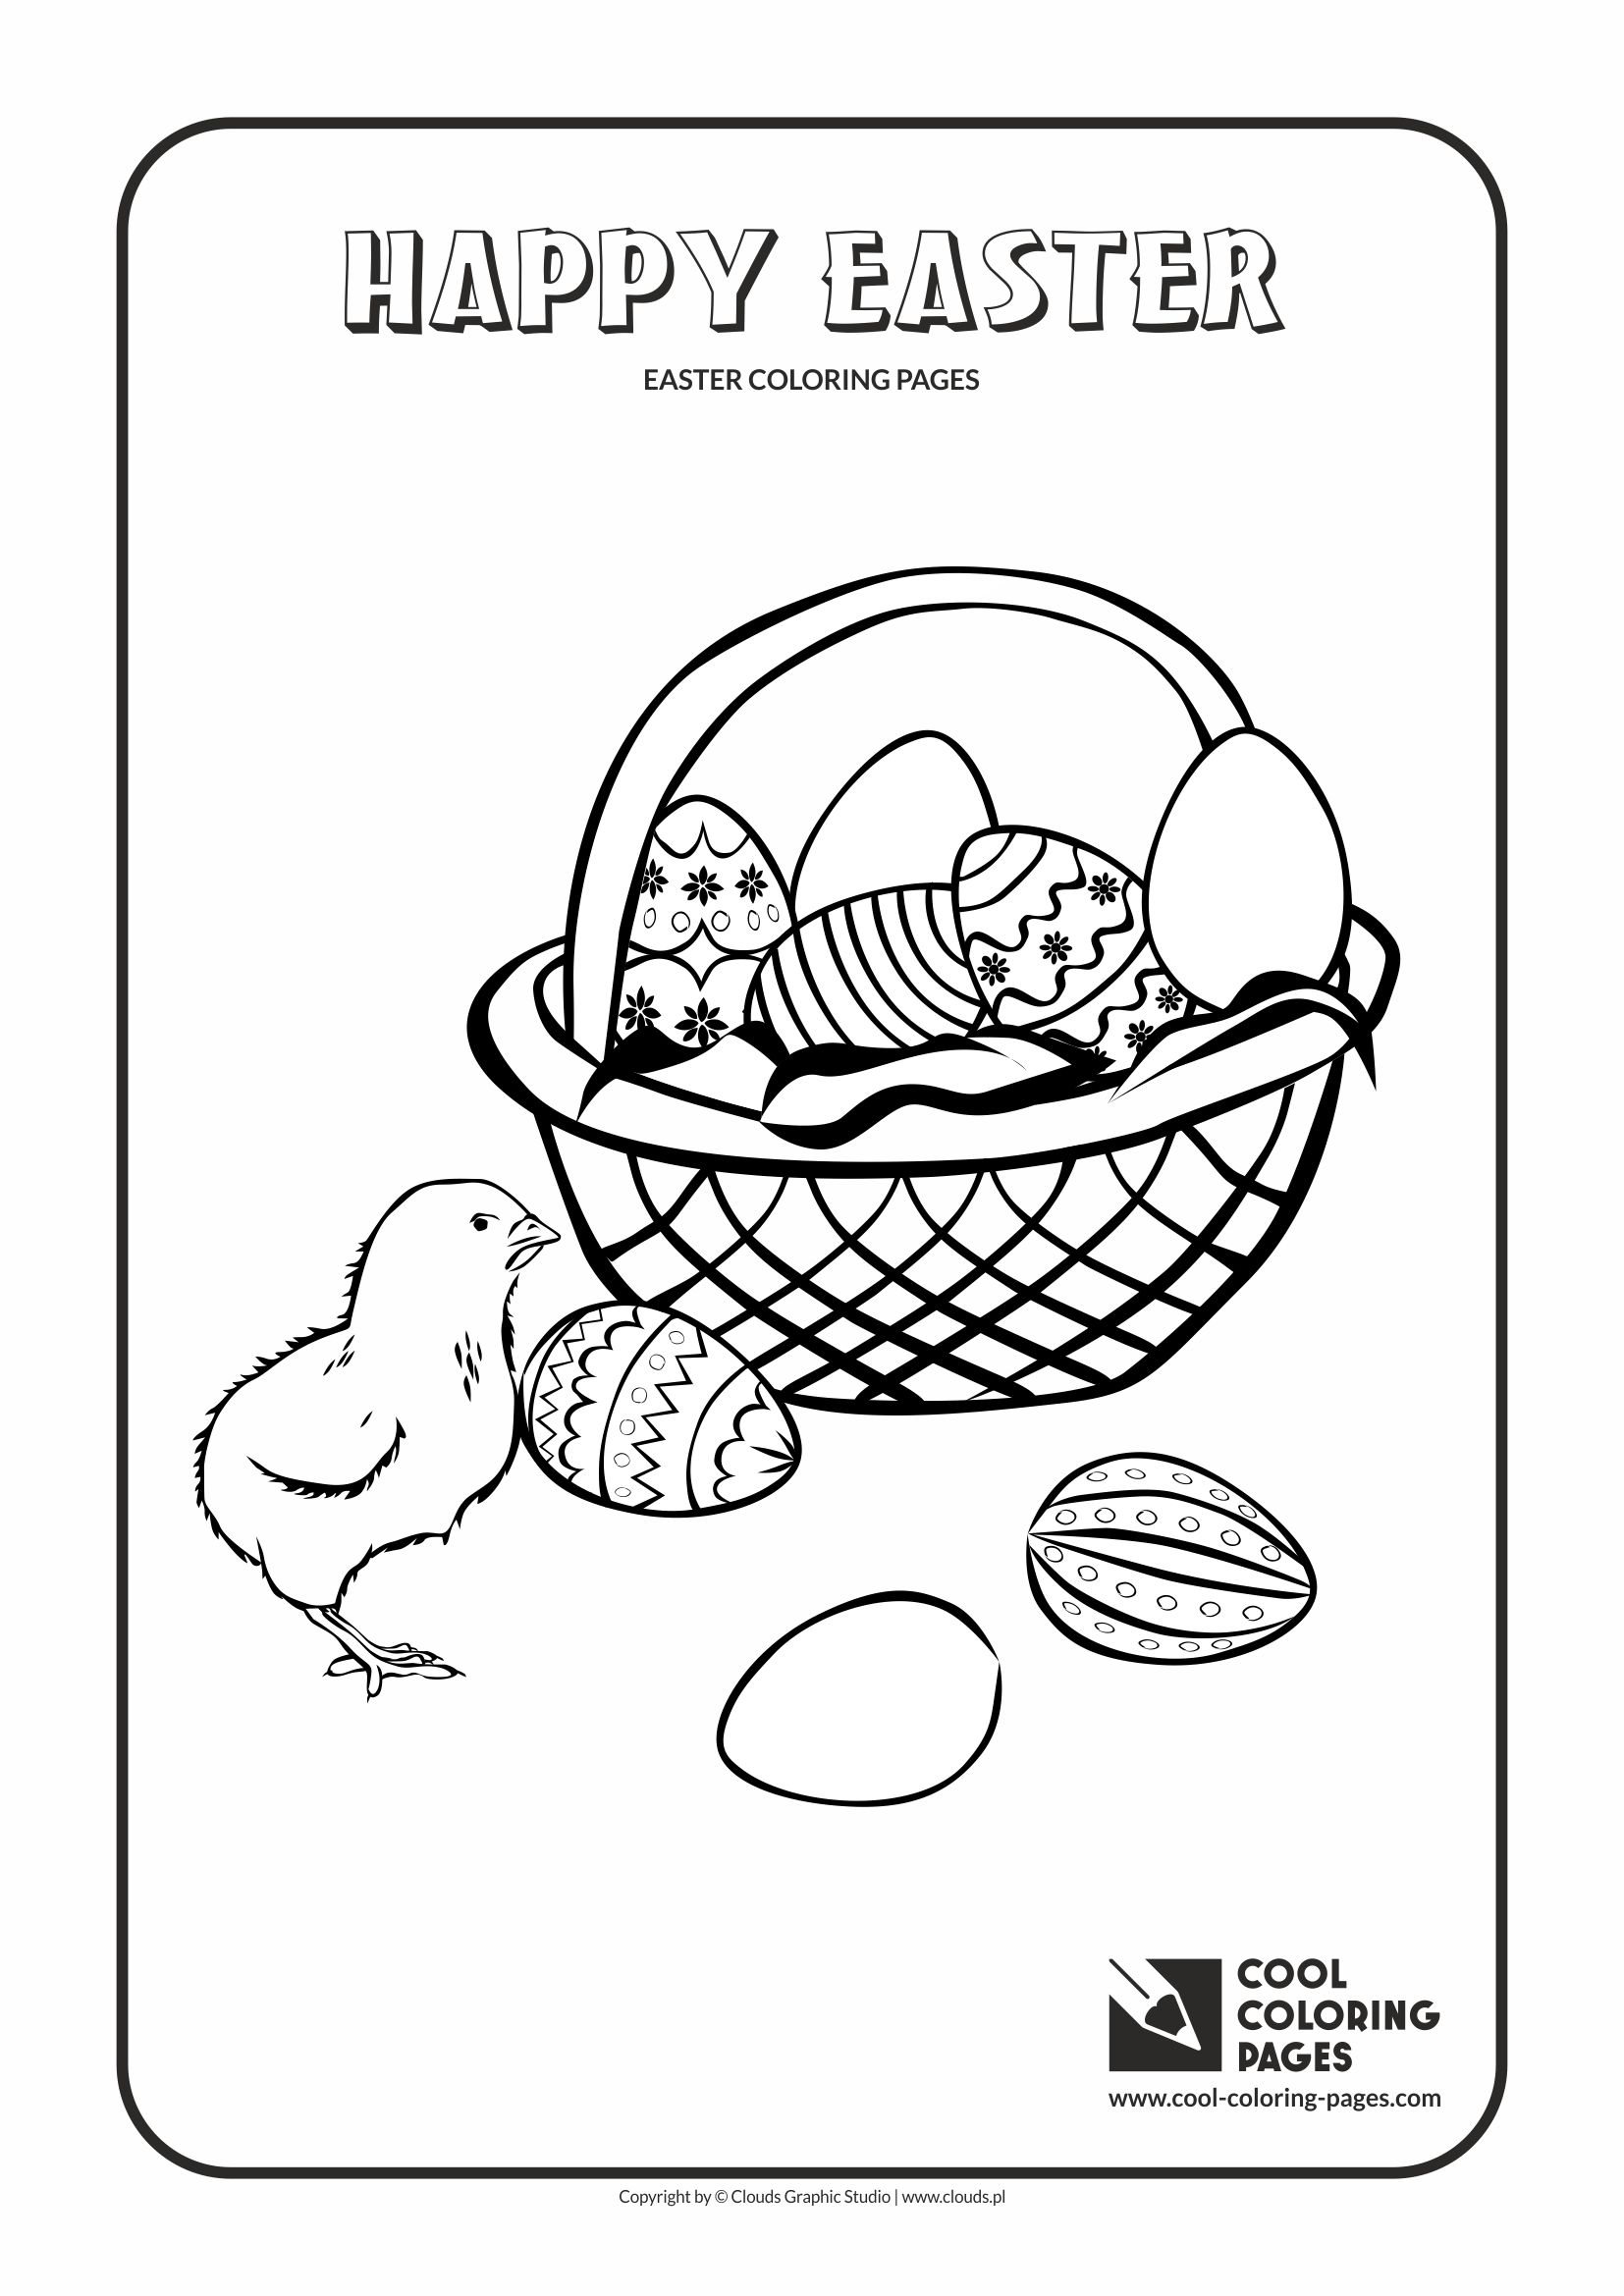 Cool Coloring Pages - Holidays / Easter basket / Coloring page with Easter basket